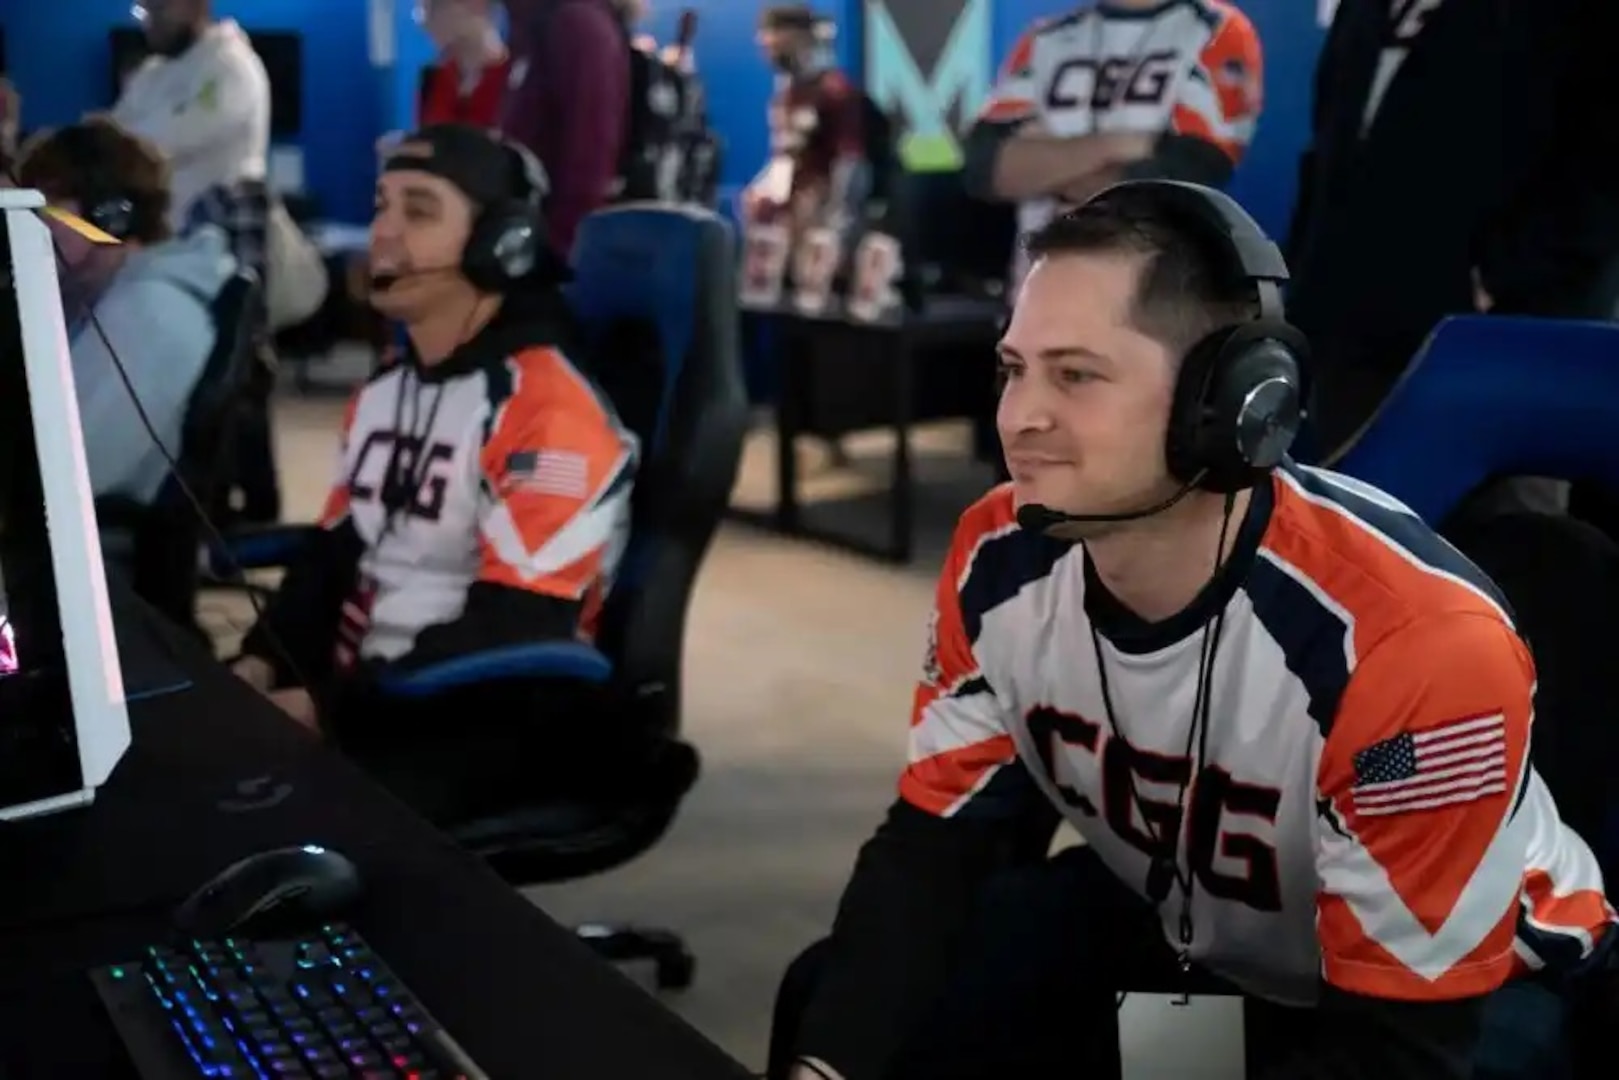 Petty Officer 1st Class Alex Alfonso, an information systems technician stationed at Electronic Systems Support Detachment Baltimore, competes on the Coast Guard Gaming Rocket League team, April 2, 2022, in Warminster, Pennsylvania. This tournament, held by Philly Esports and Metro Gaming, was the first Coast Guard-sponsored esports event. (U.S. Coast Guard photo by Petty Officer 2nd Class Jasmine Mieszala)